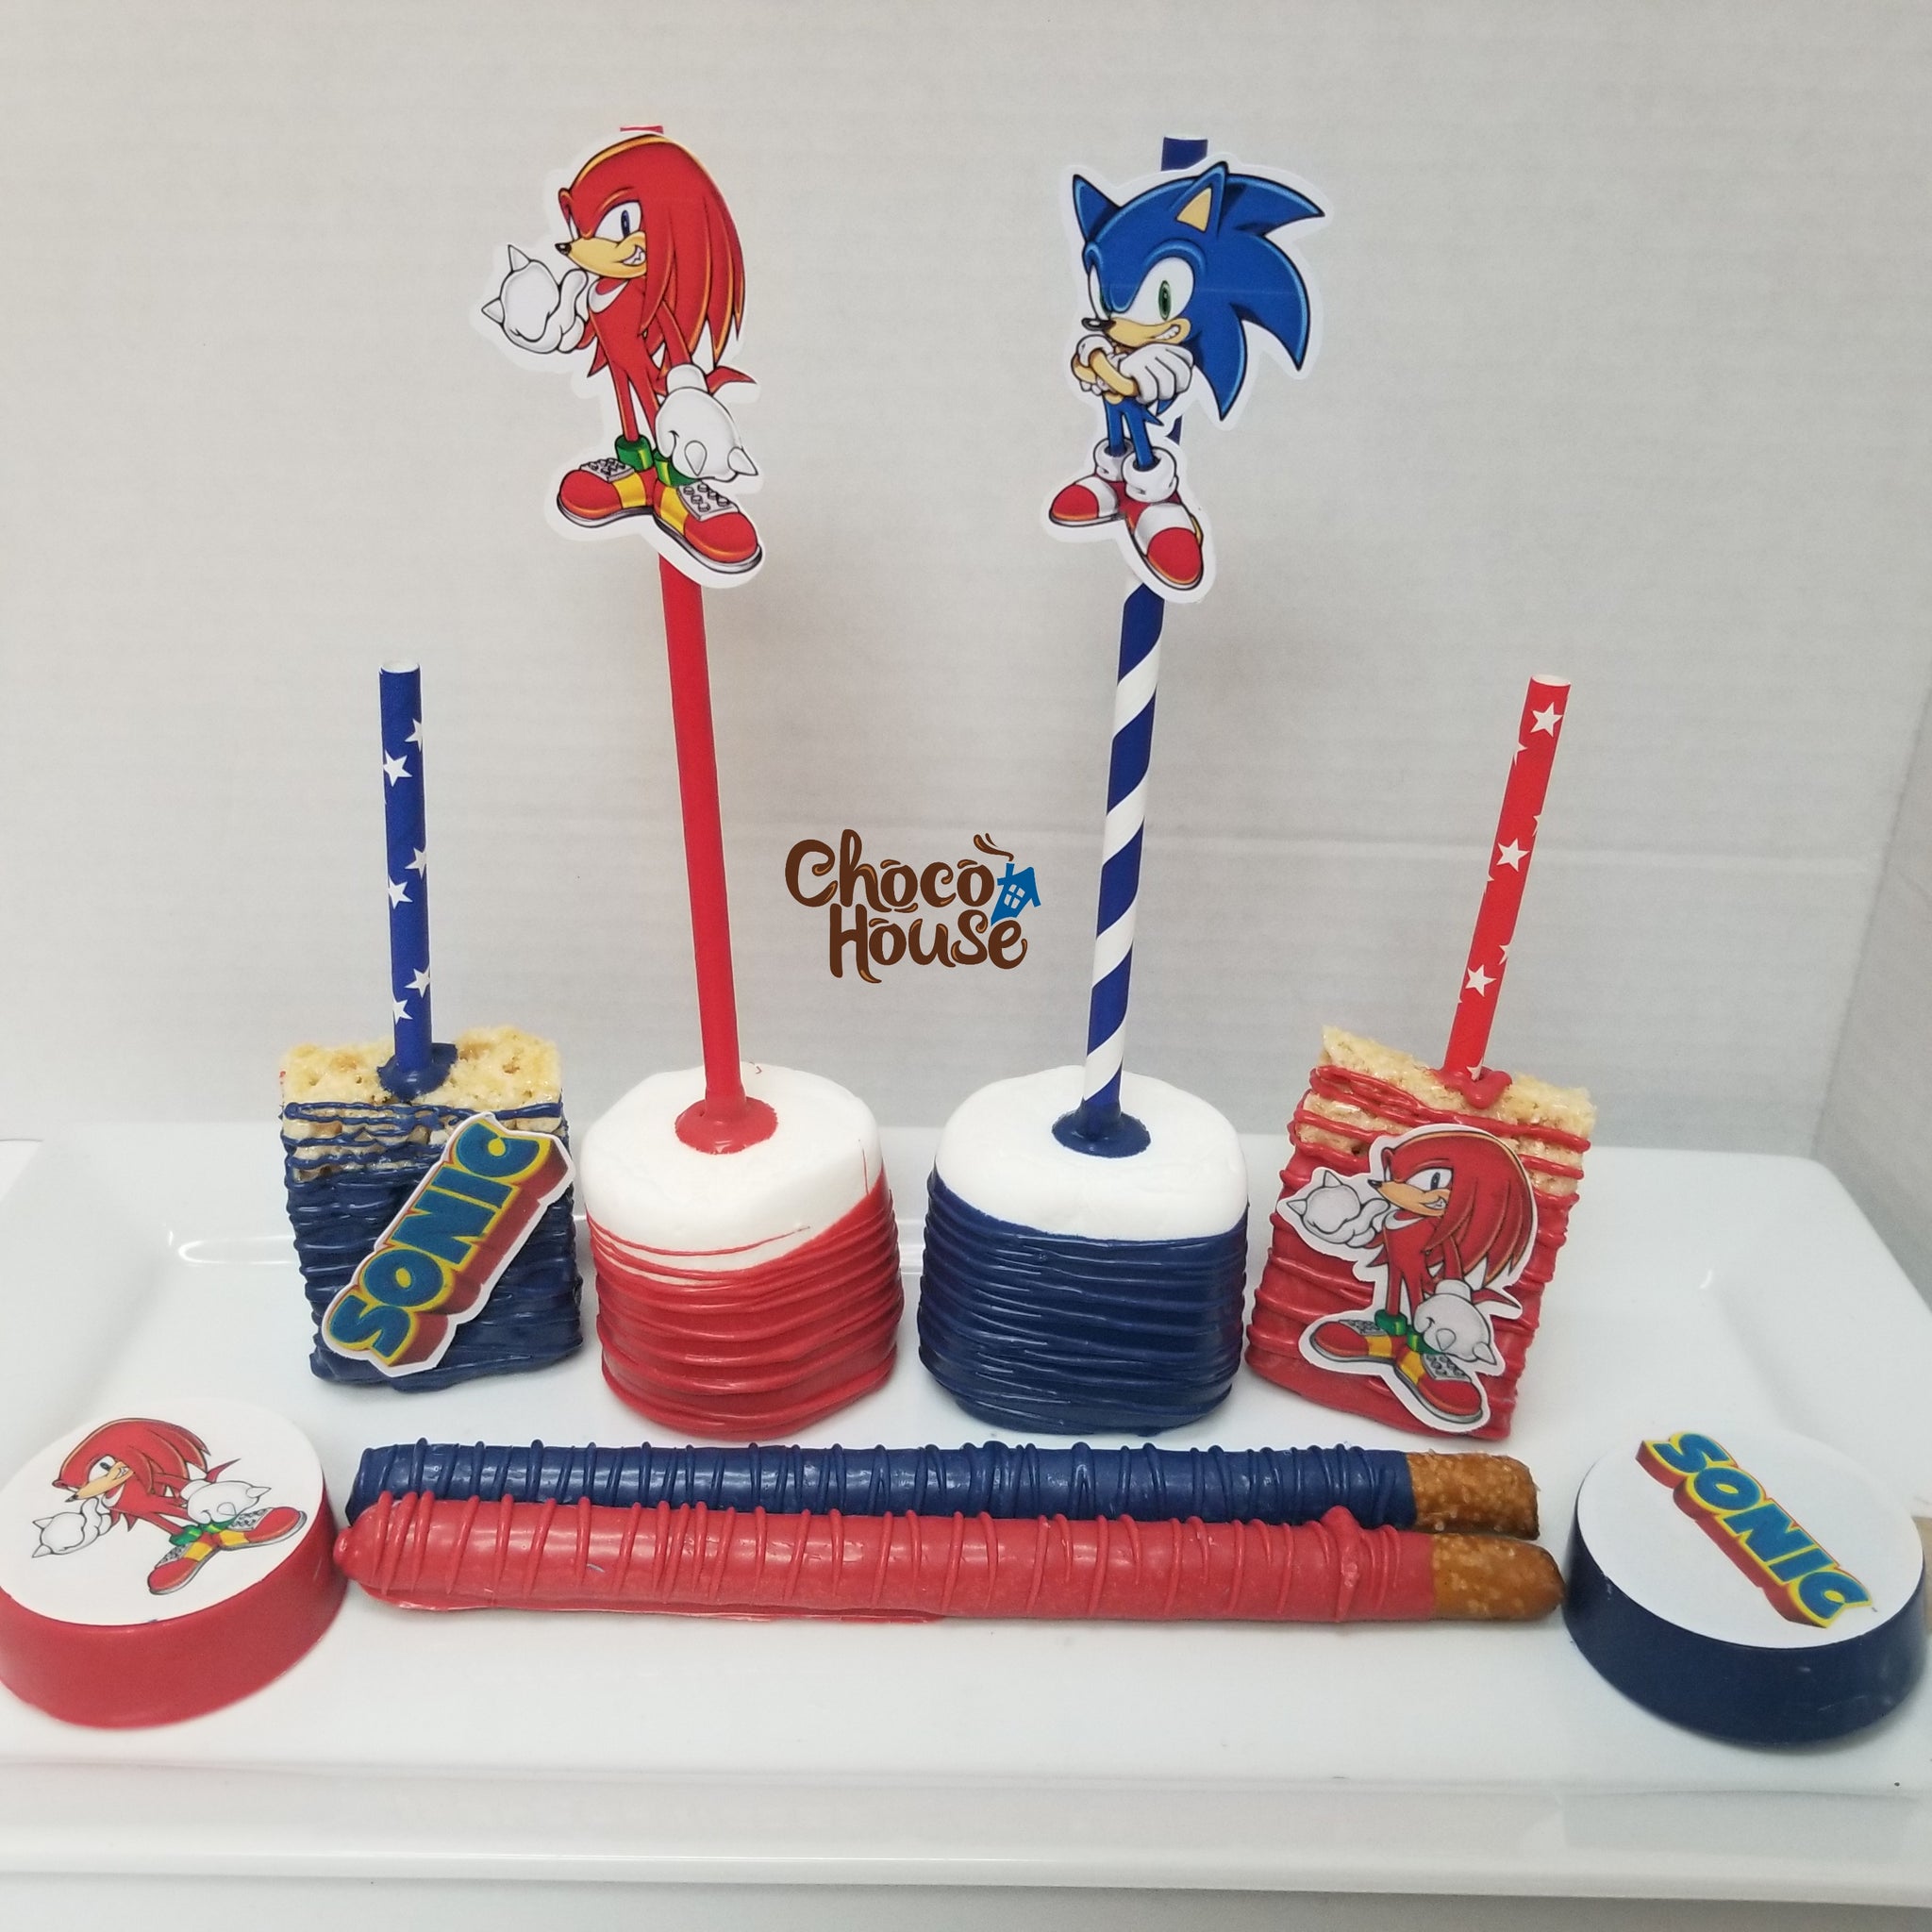 Sonic Edible Image Toppers — Choco House